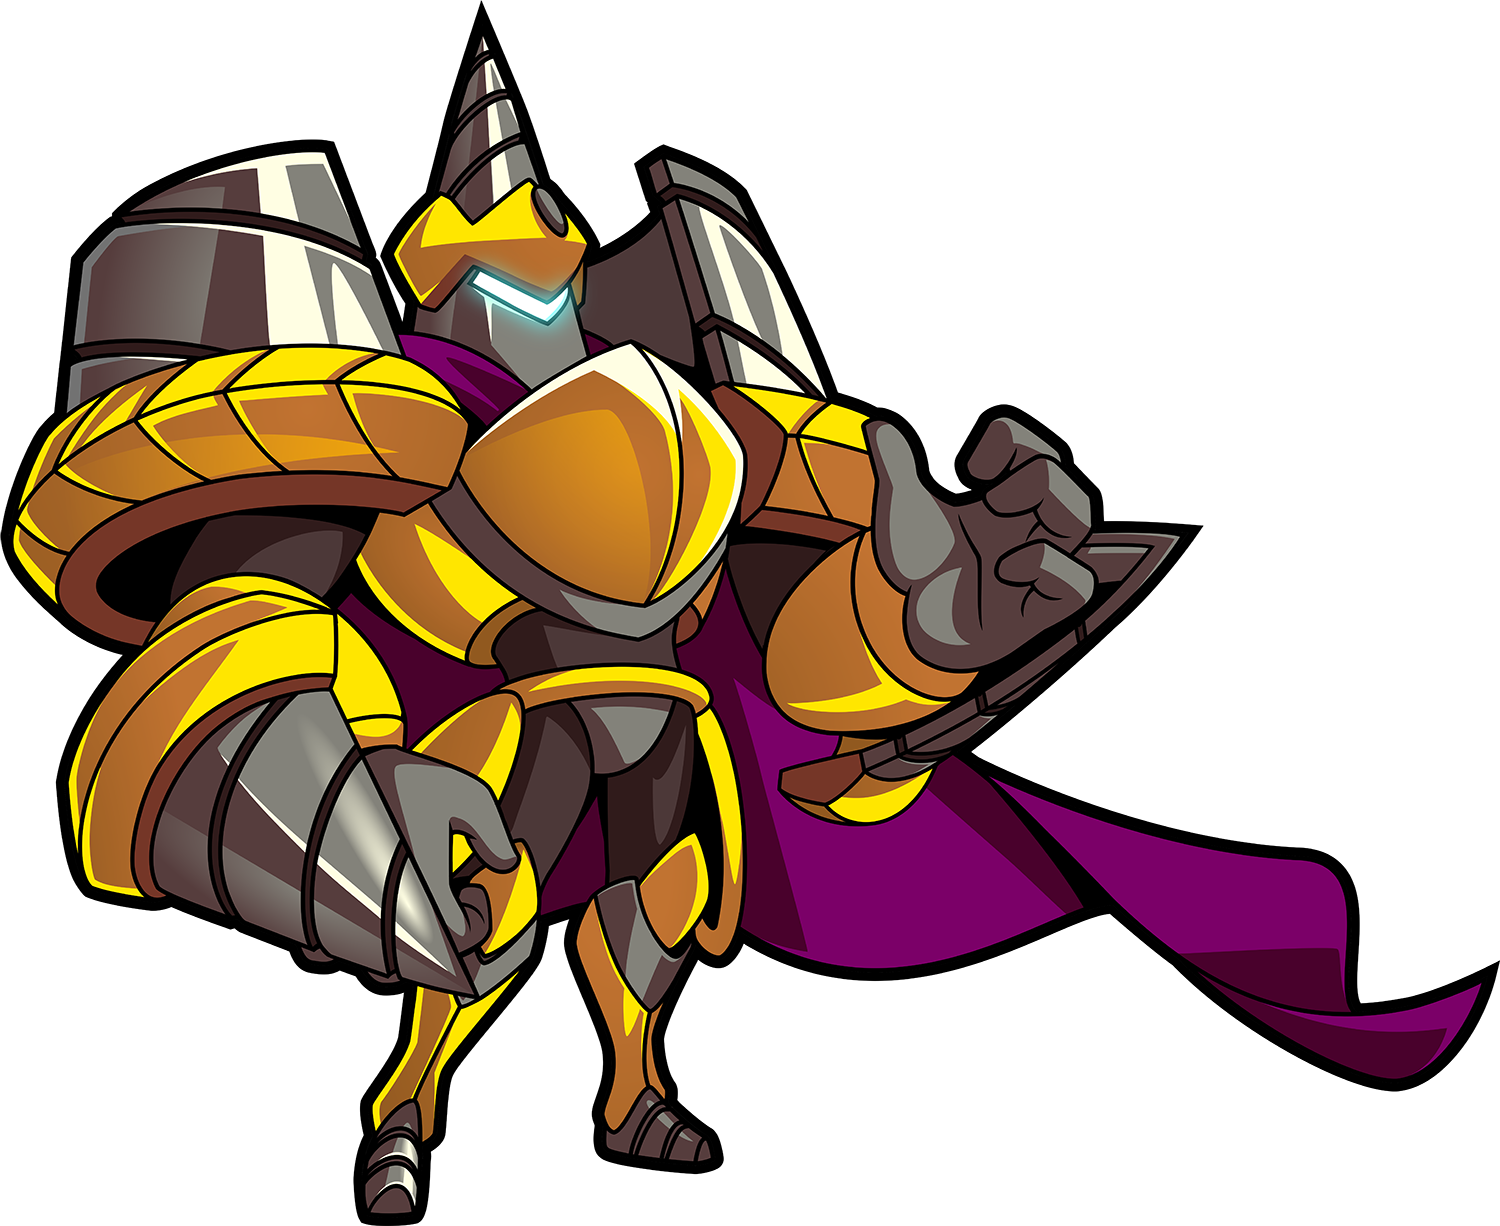 Animated Armored Knight Character